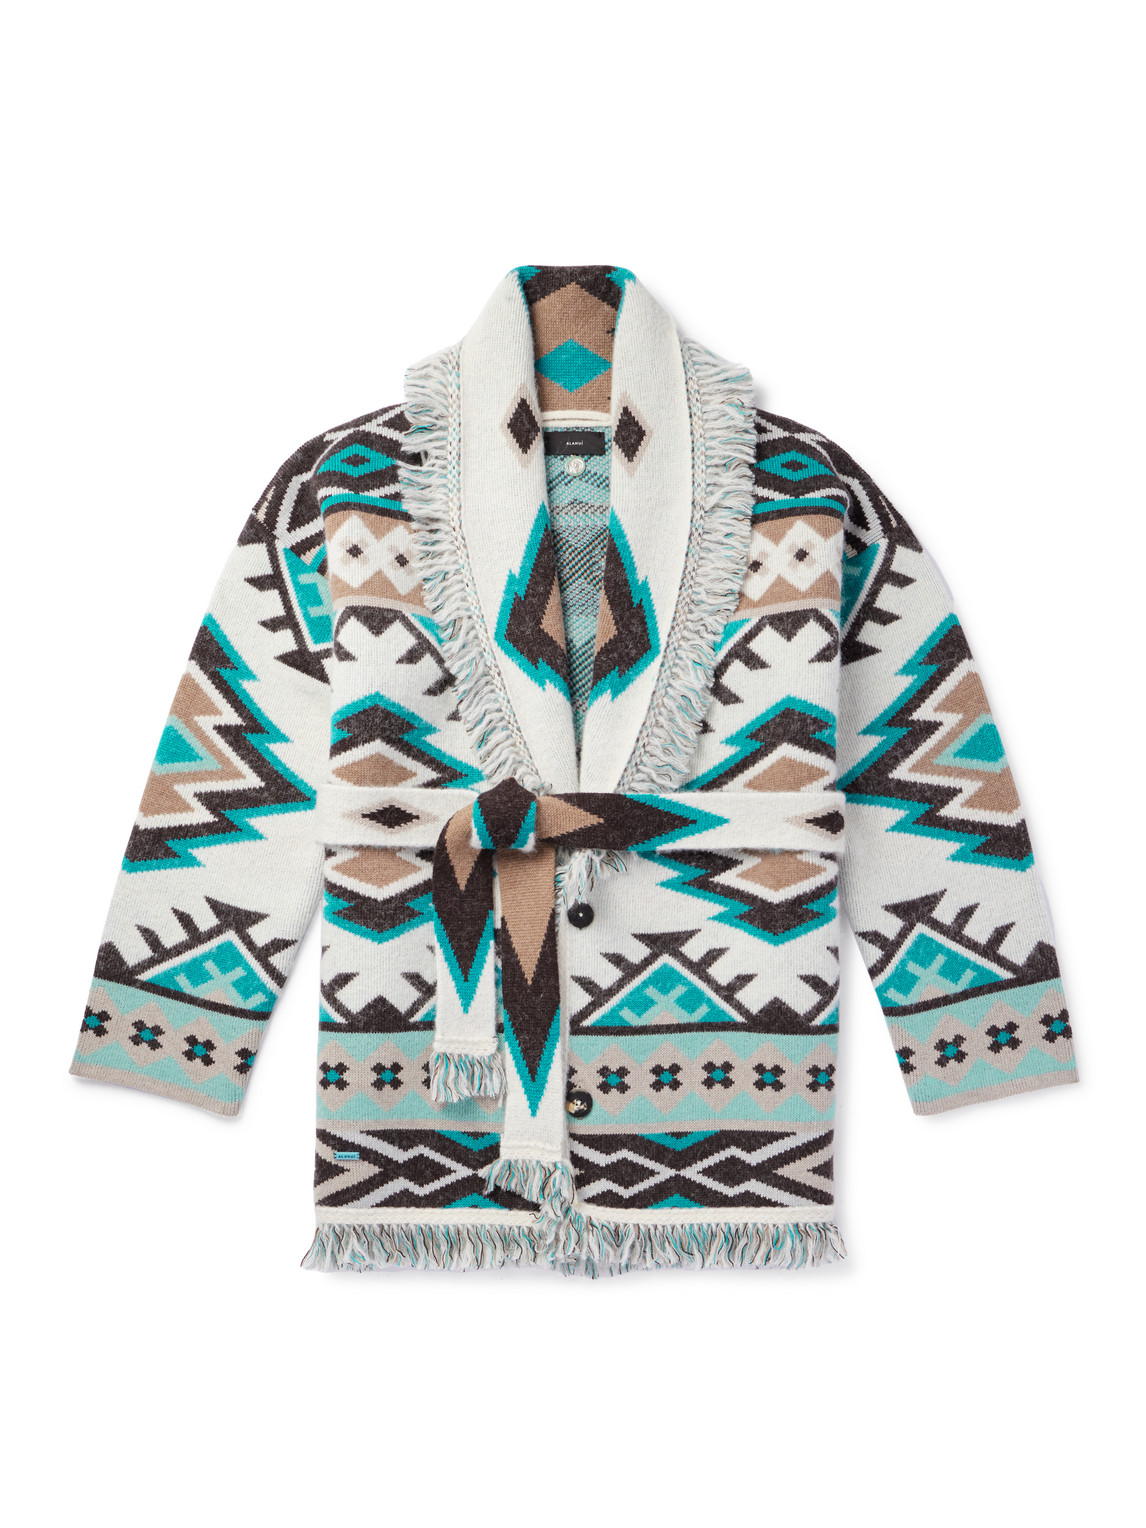 ALANUI THE NEVER ENDING WINTER FRINGED BELTED JACQUARD-KNIT CASHMERE CARDIGAN